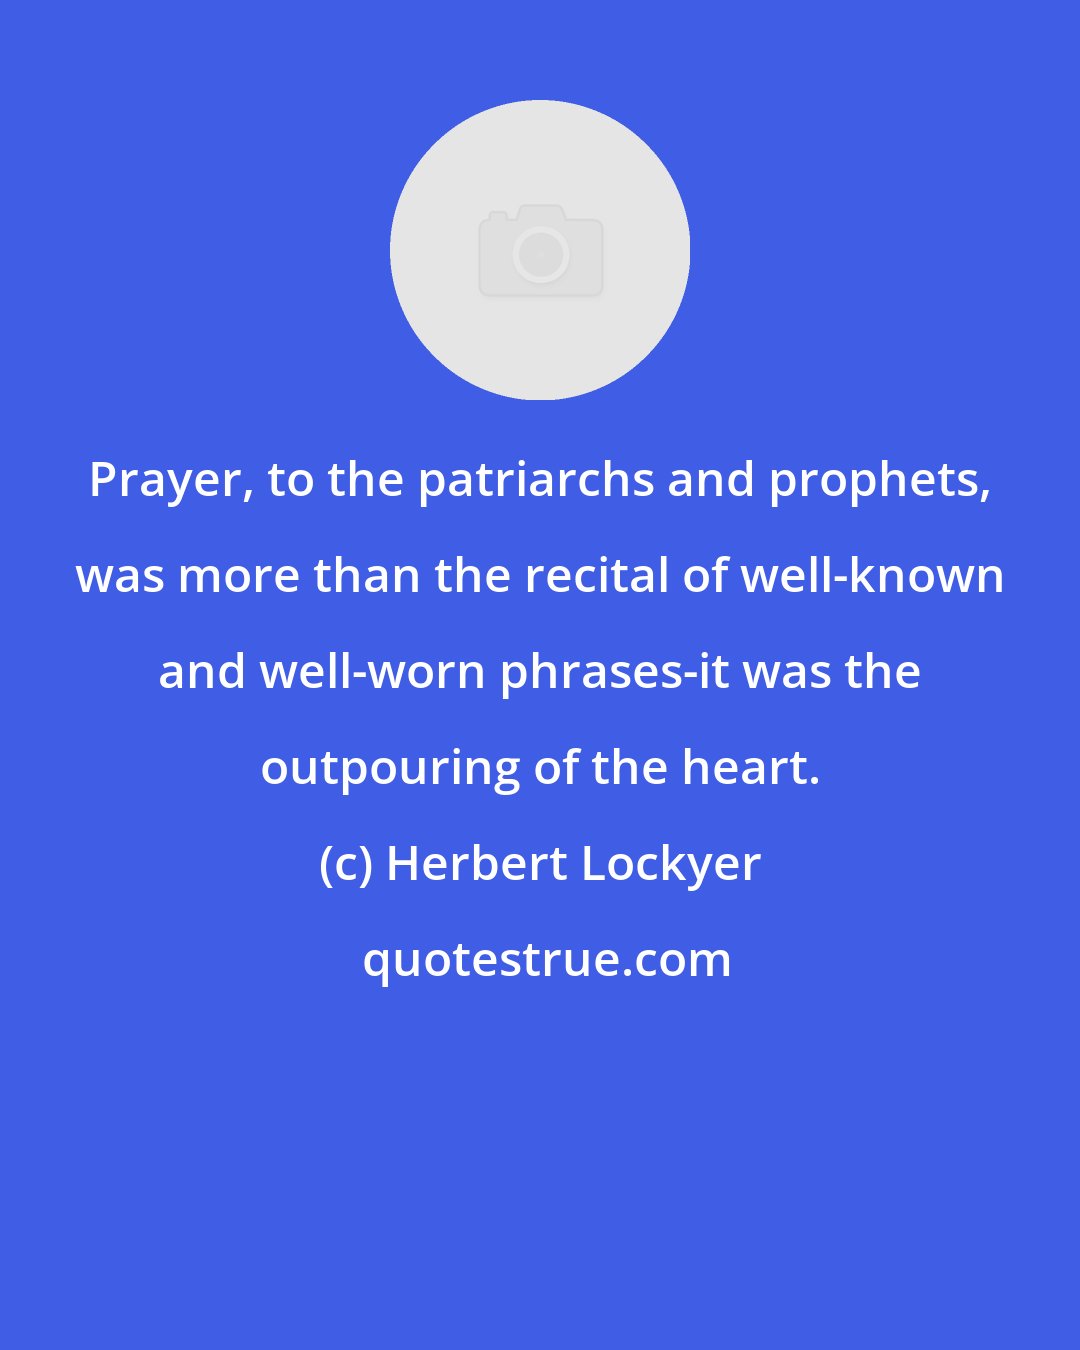 Herbert Lockyer: Prayer, to the patriarchs and prophets, was more than the recital of well-known and well-worn phrases-it was the outpouring of the heart.